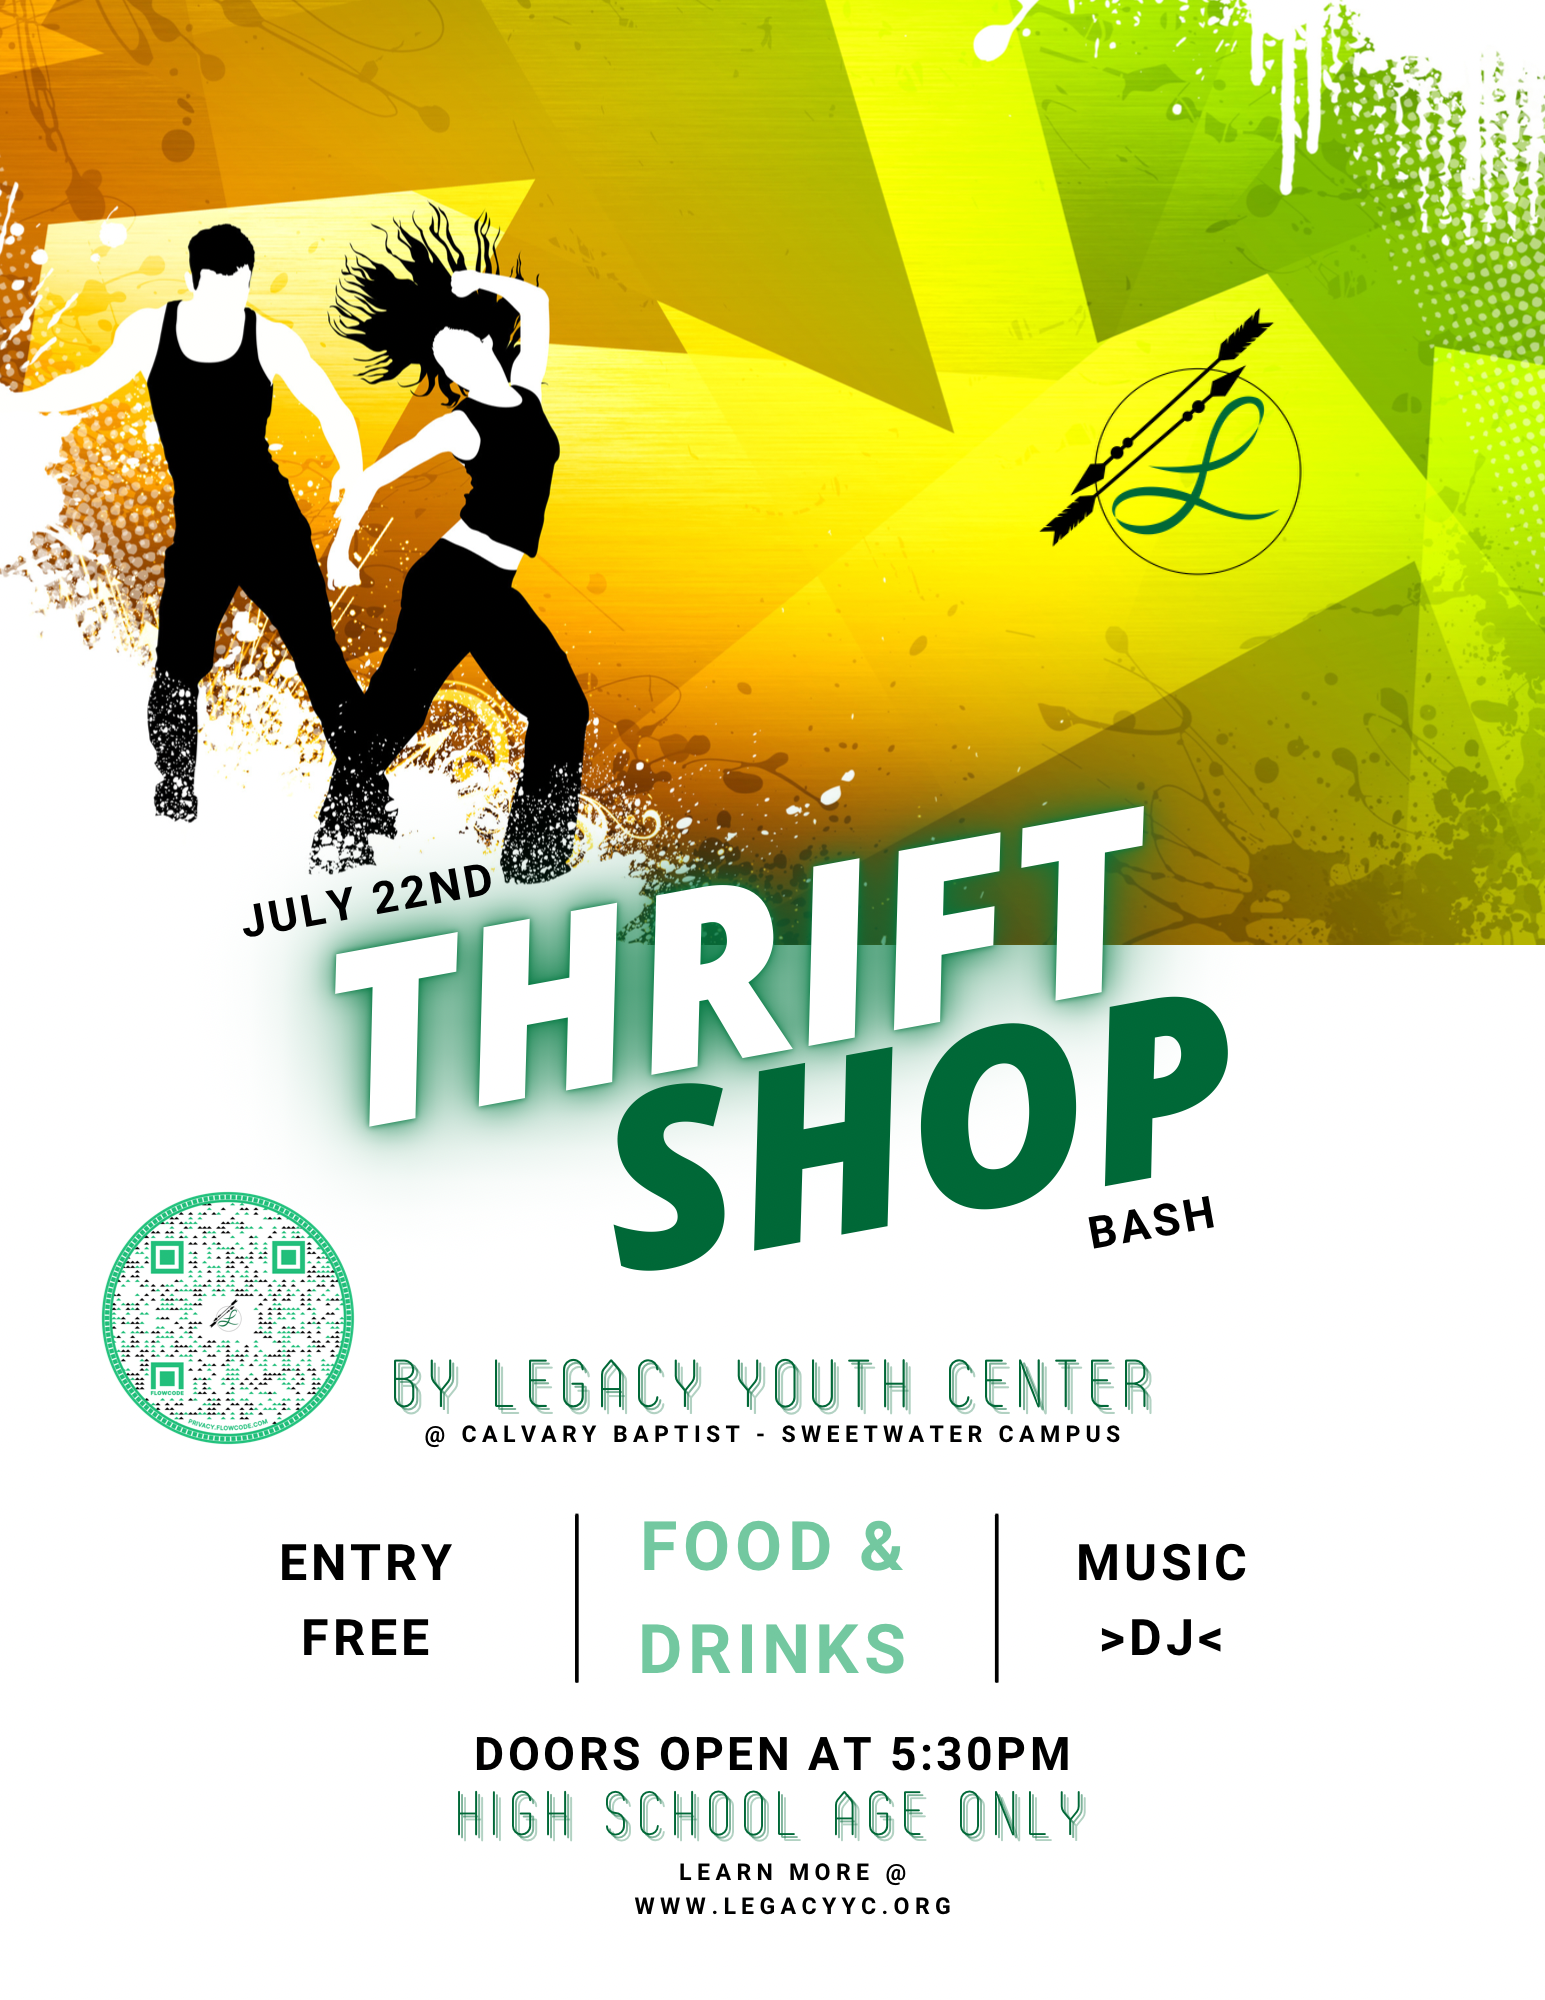 Legacy’s Thrift Shop Bash has been postponed